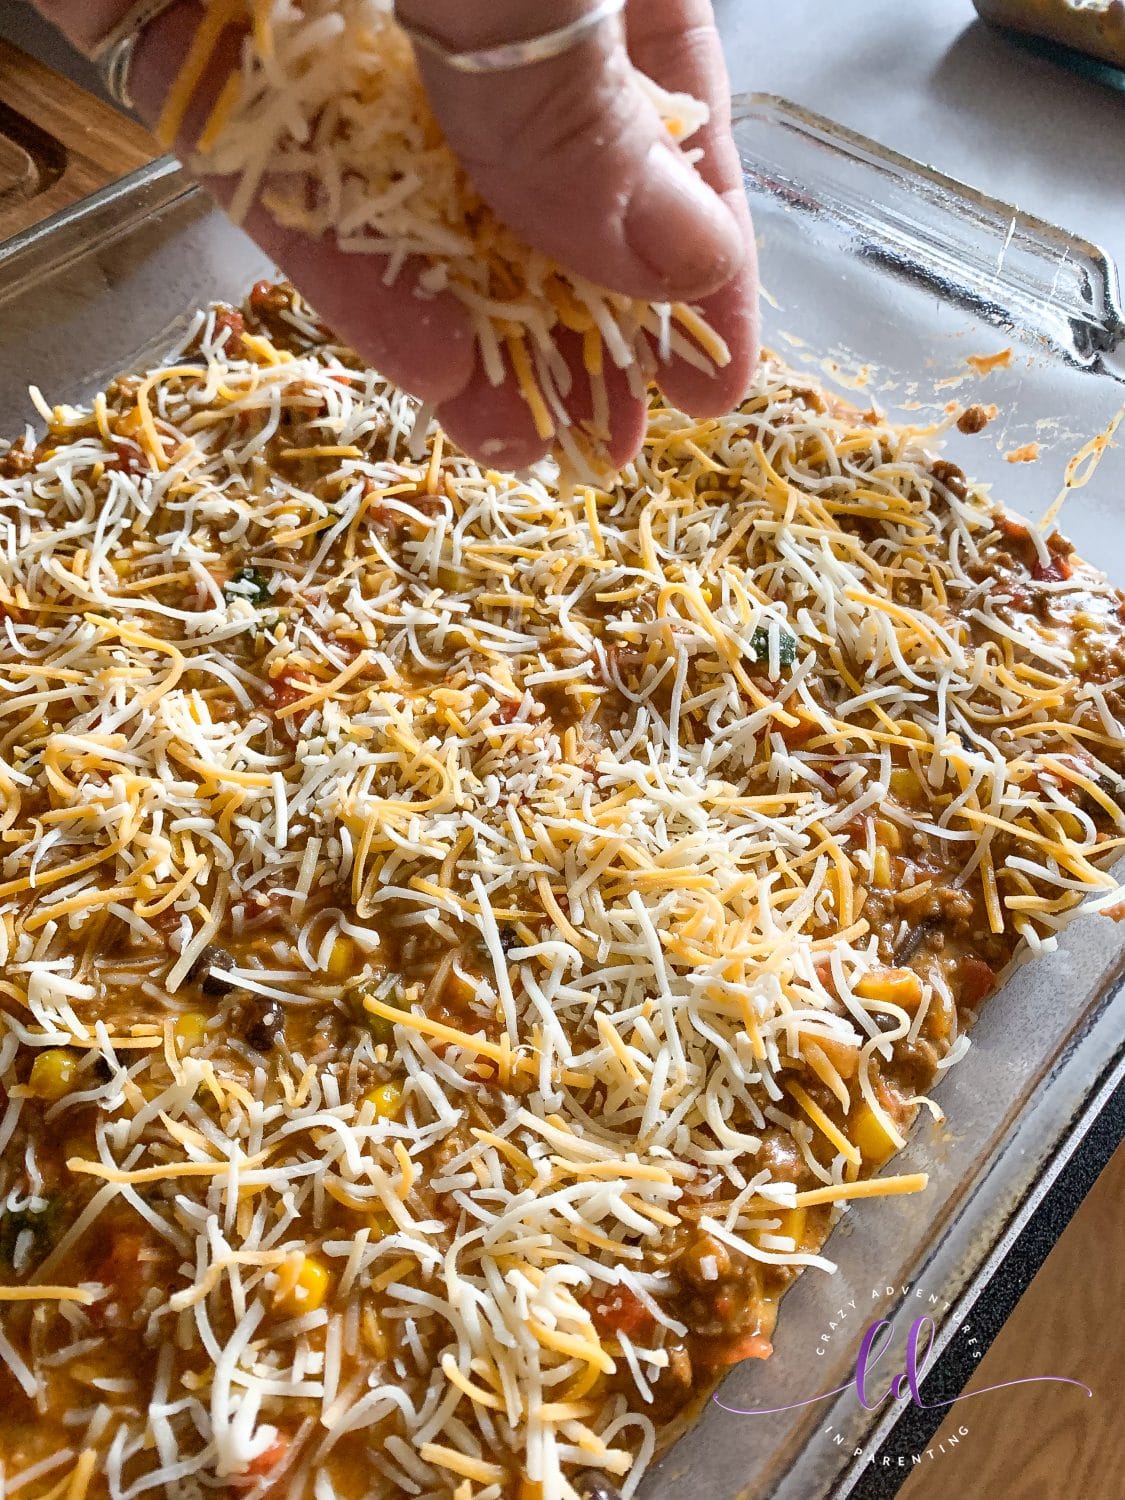 Top with Cheese - Best Taco Casserole Recipe